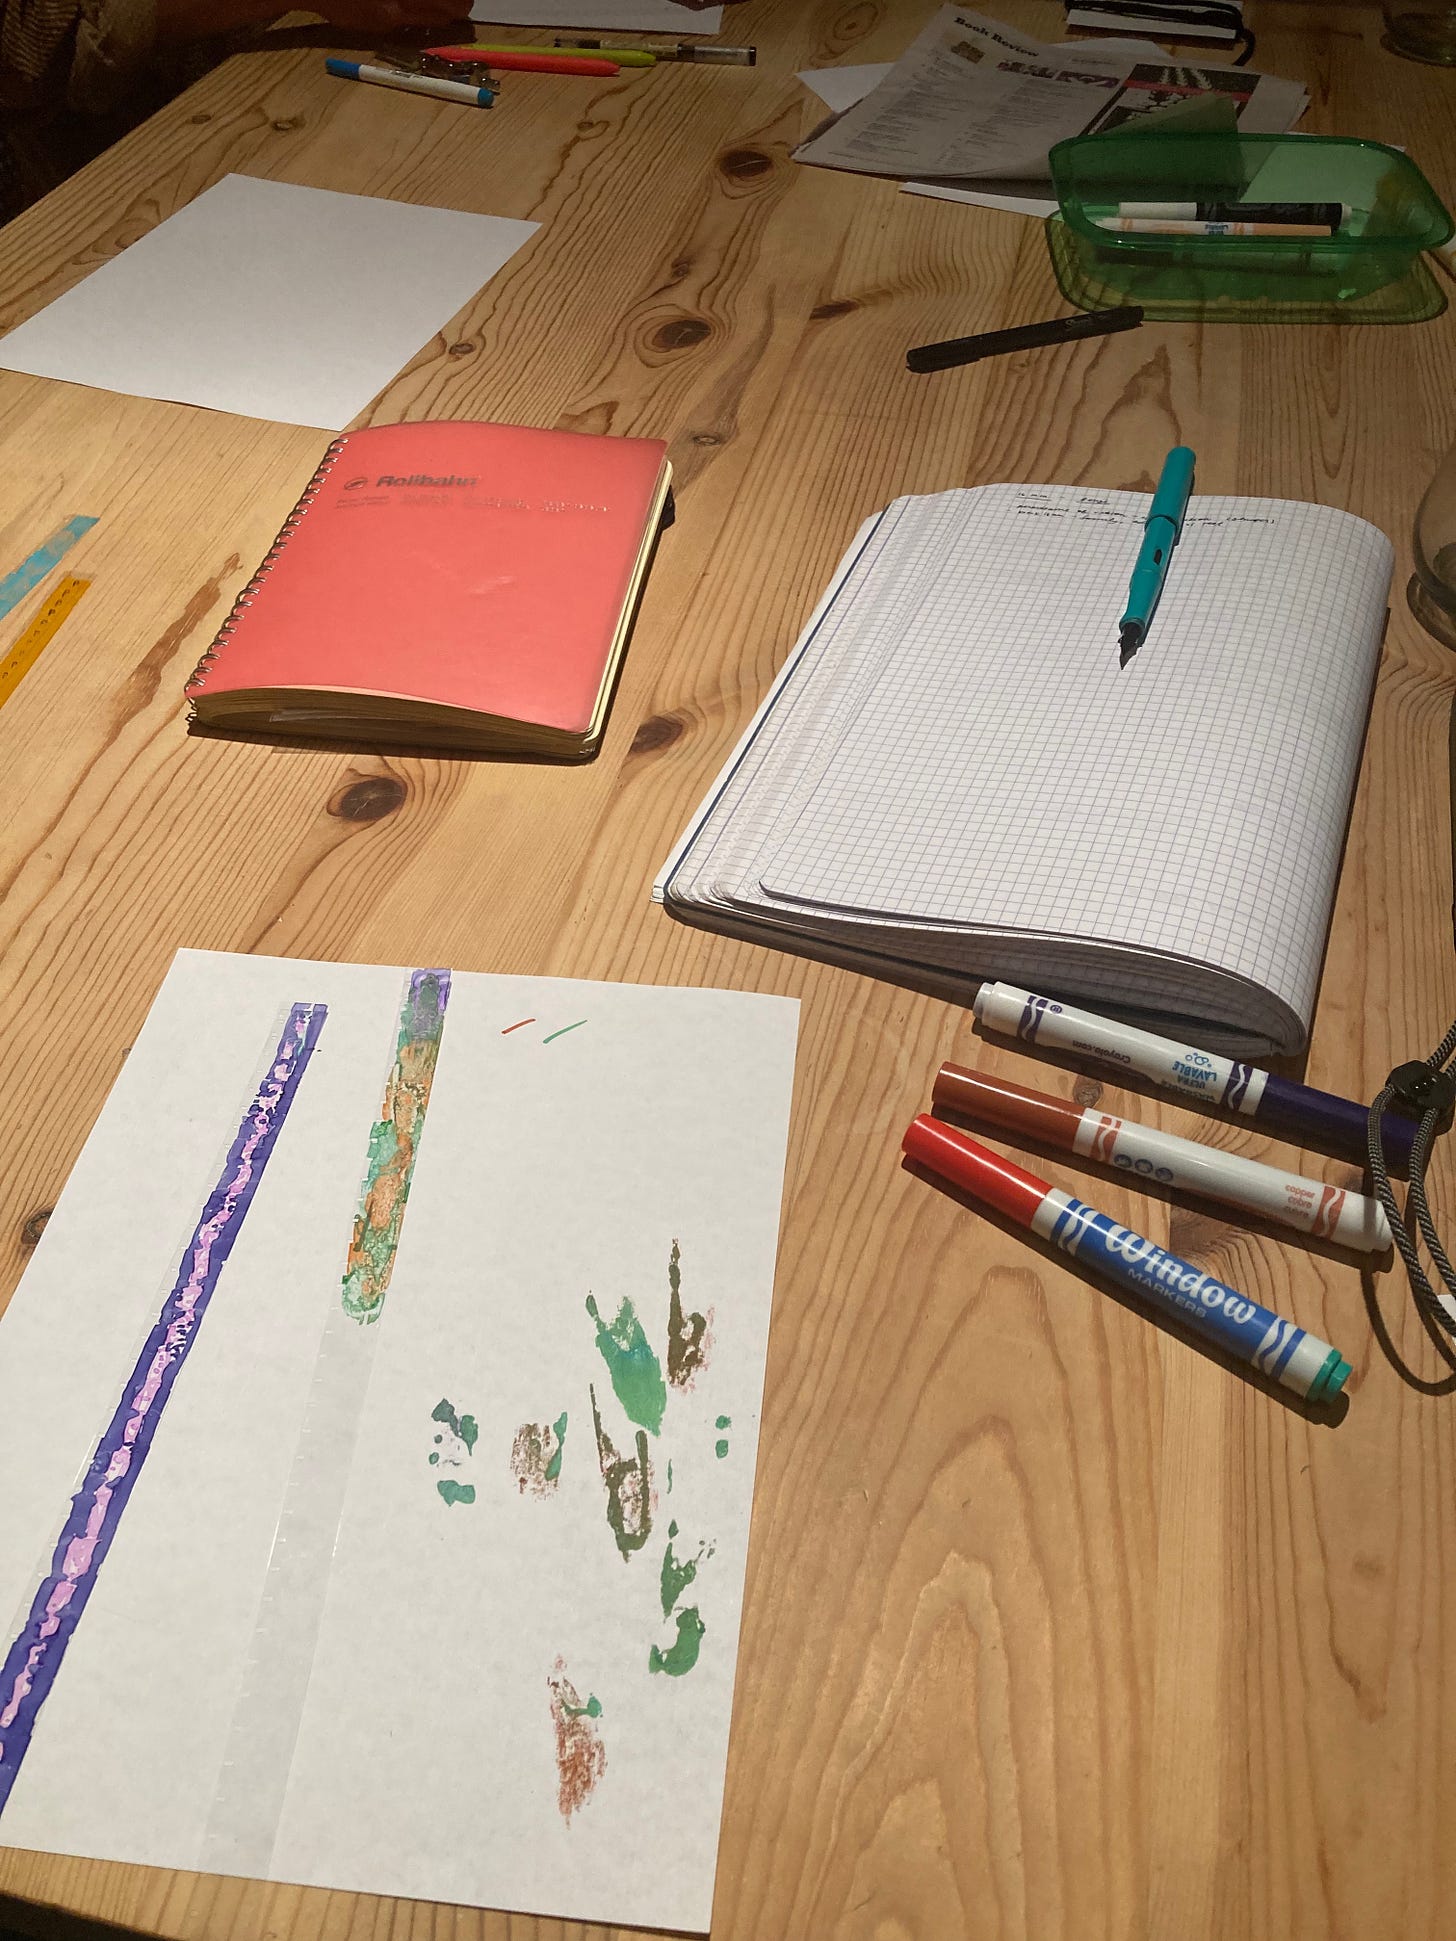 Strips of film stock colored with marker, notebooks, and markers on a wooden table